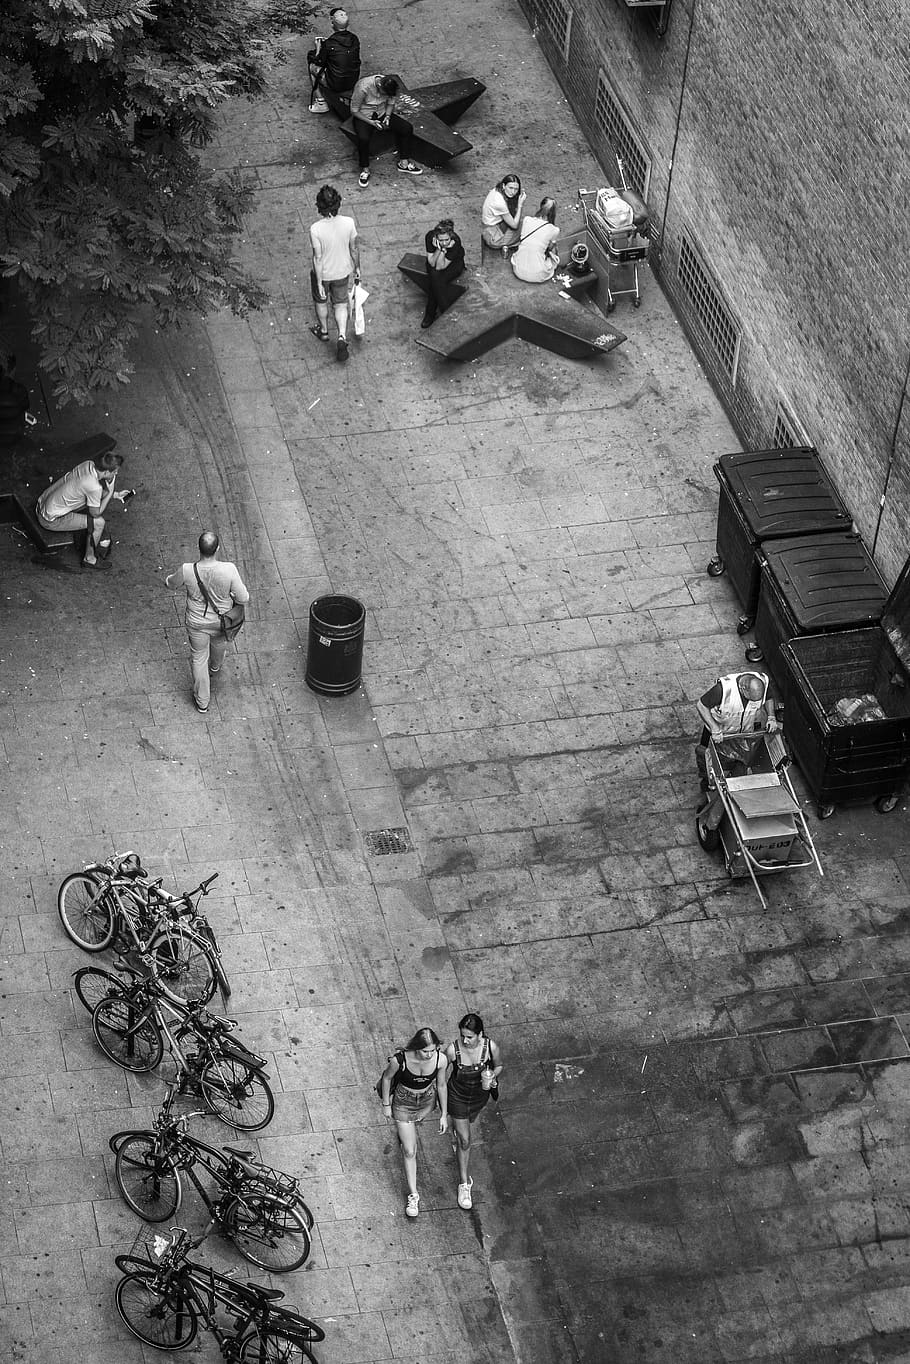 bird's eye view, human, pedestrian, bicycles, street cleaning, london, road, side street, personal, live